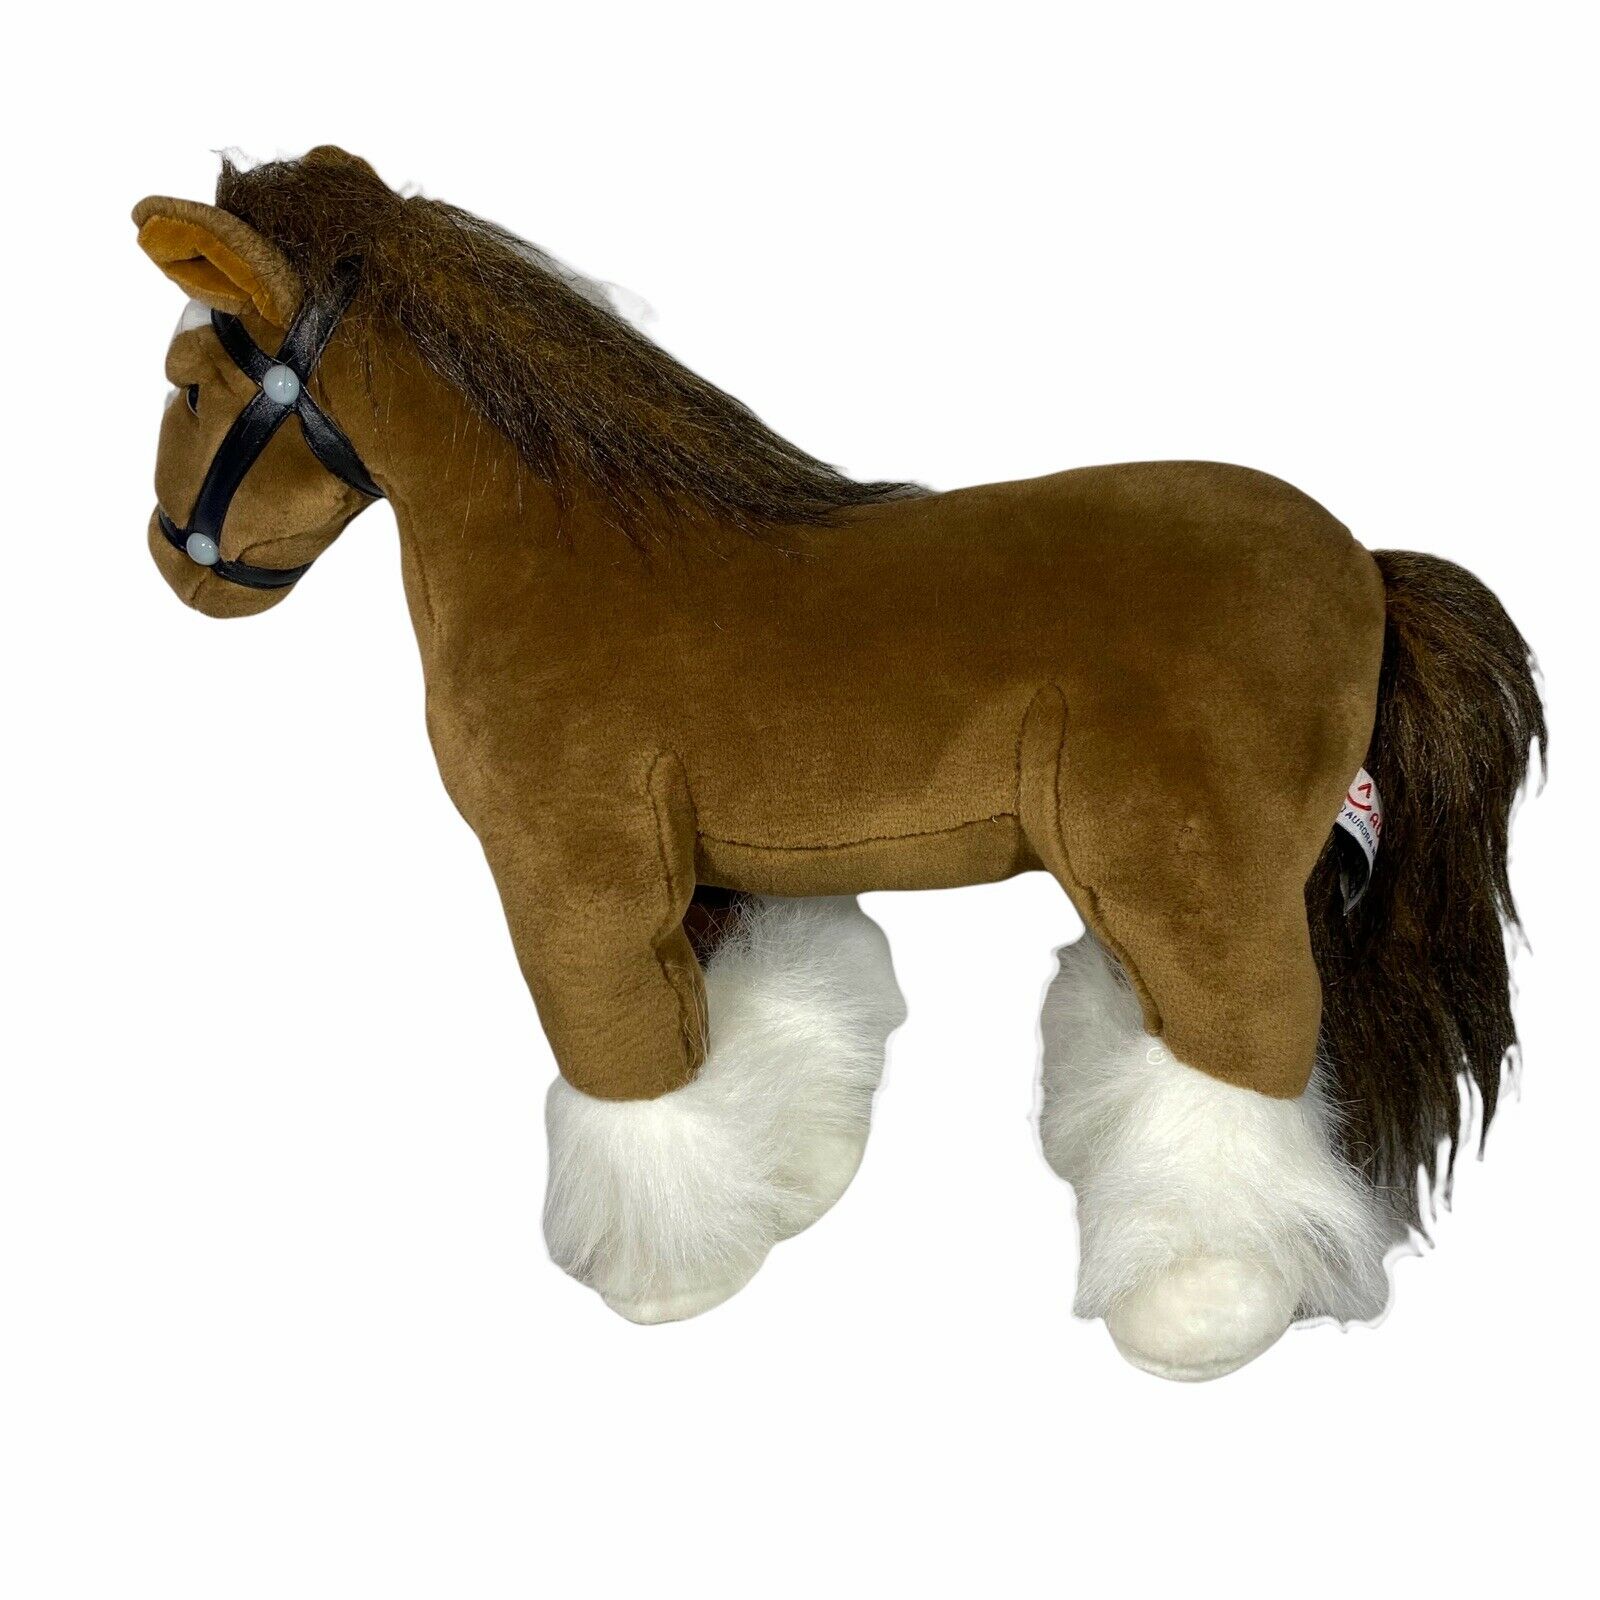 Aurora Plush Horse Brown White Standing Clydesdale 14”